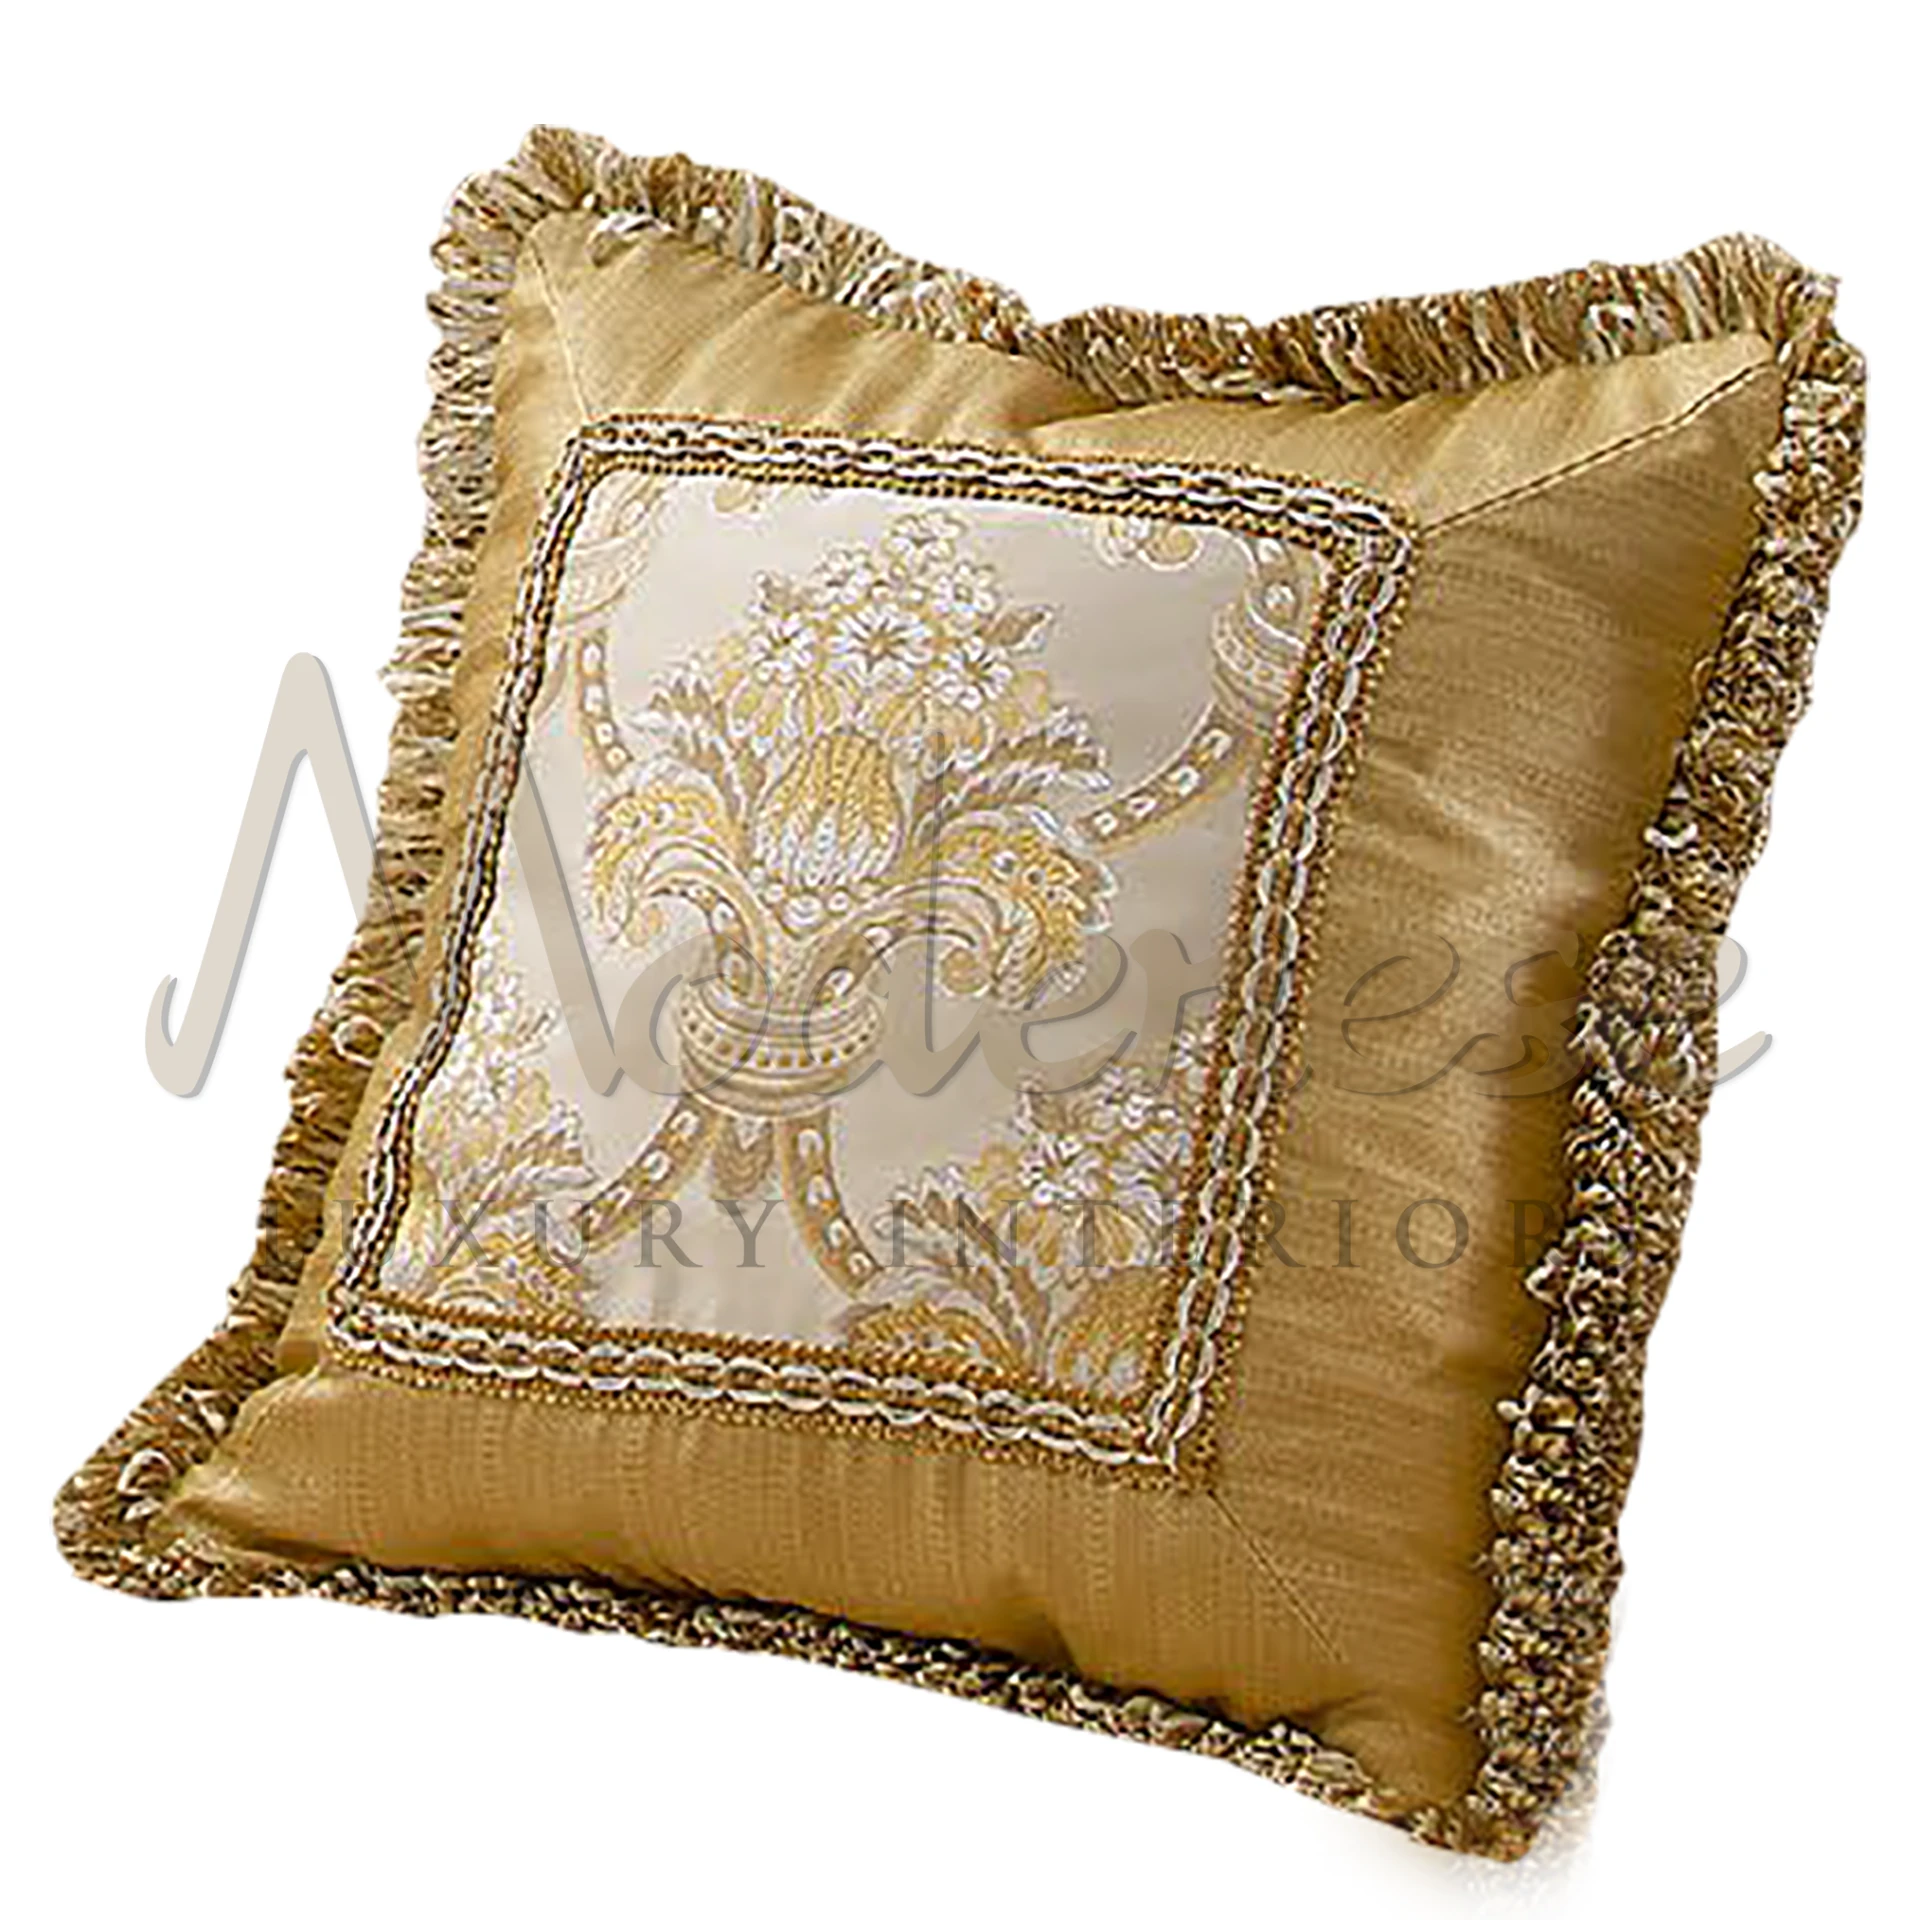 Victorian Beige Pillow: Experience the height of luxury with silky satin or velvety softness, perfect for opulent decor.